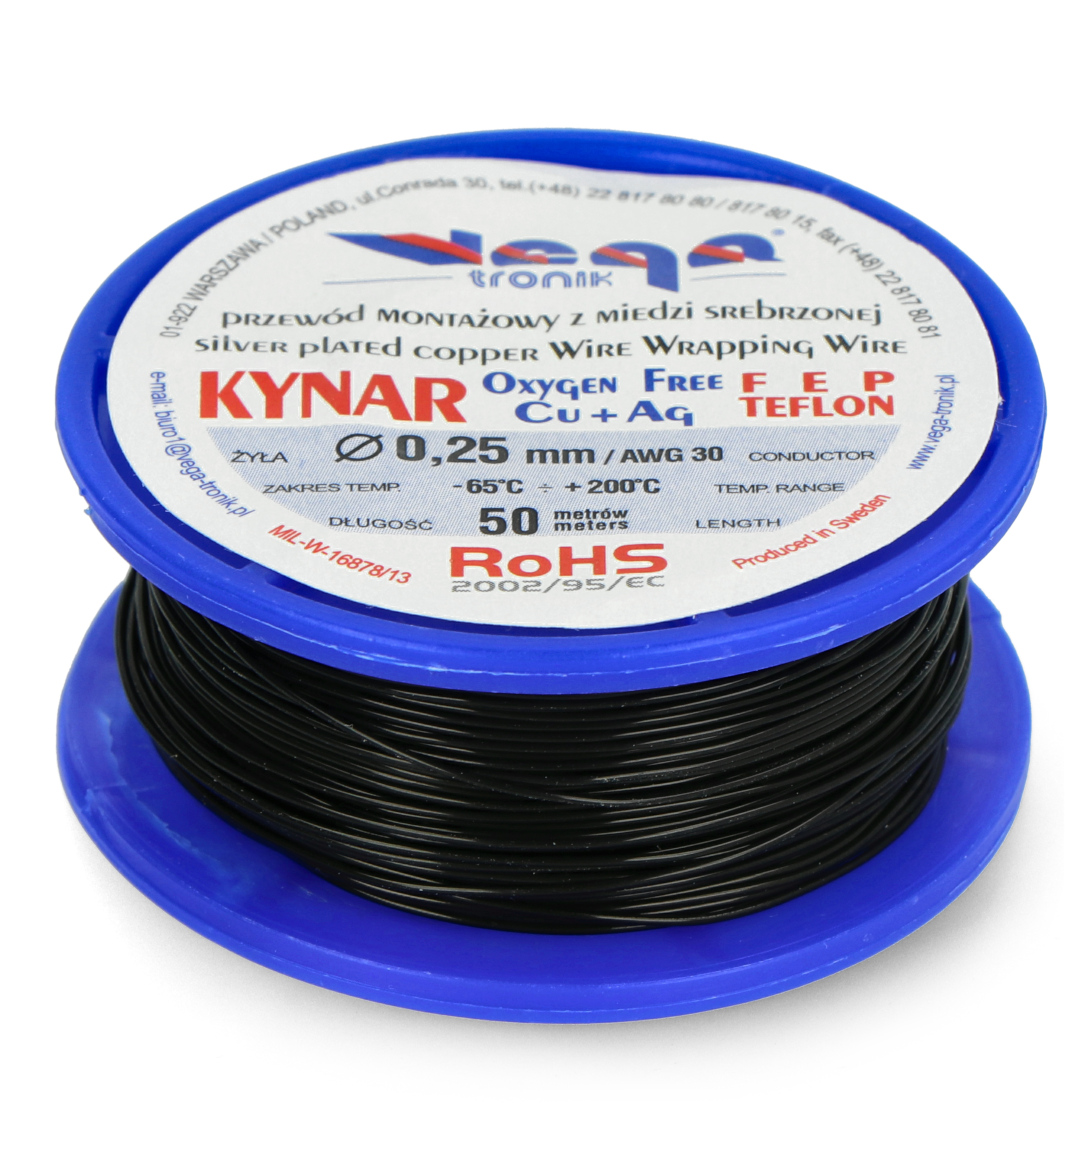 10 ft  Kynar wire wrap wire 30 awg 4 modding 10 color ship from USA 